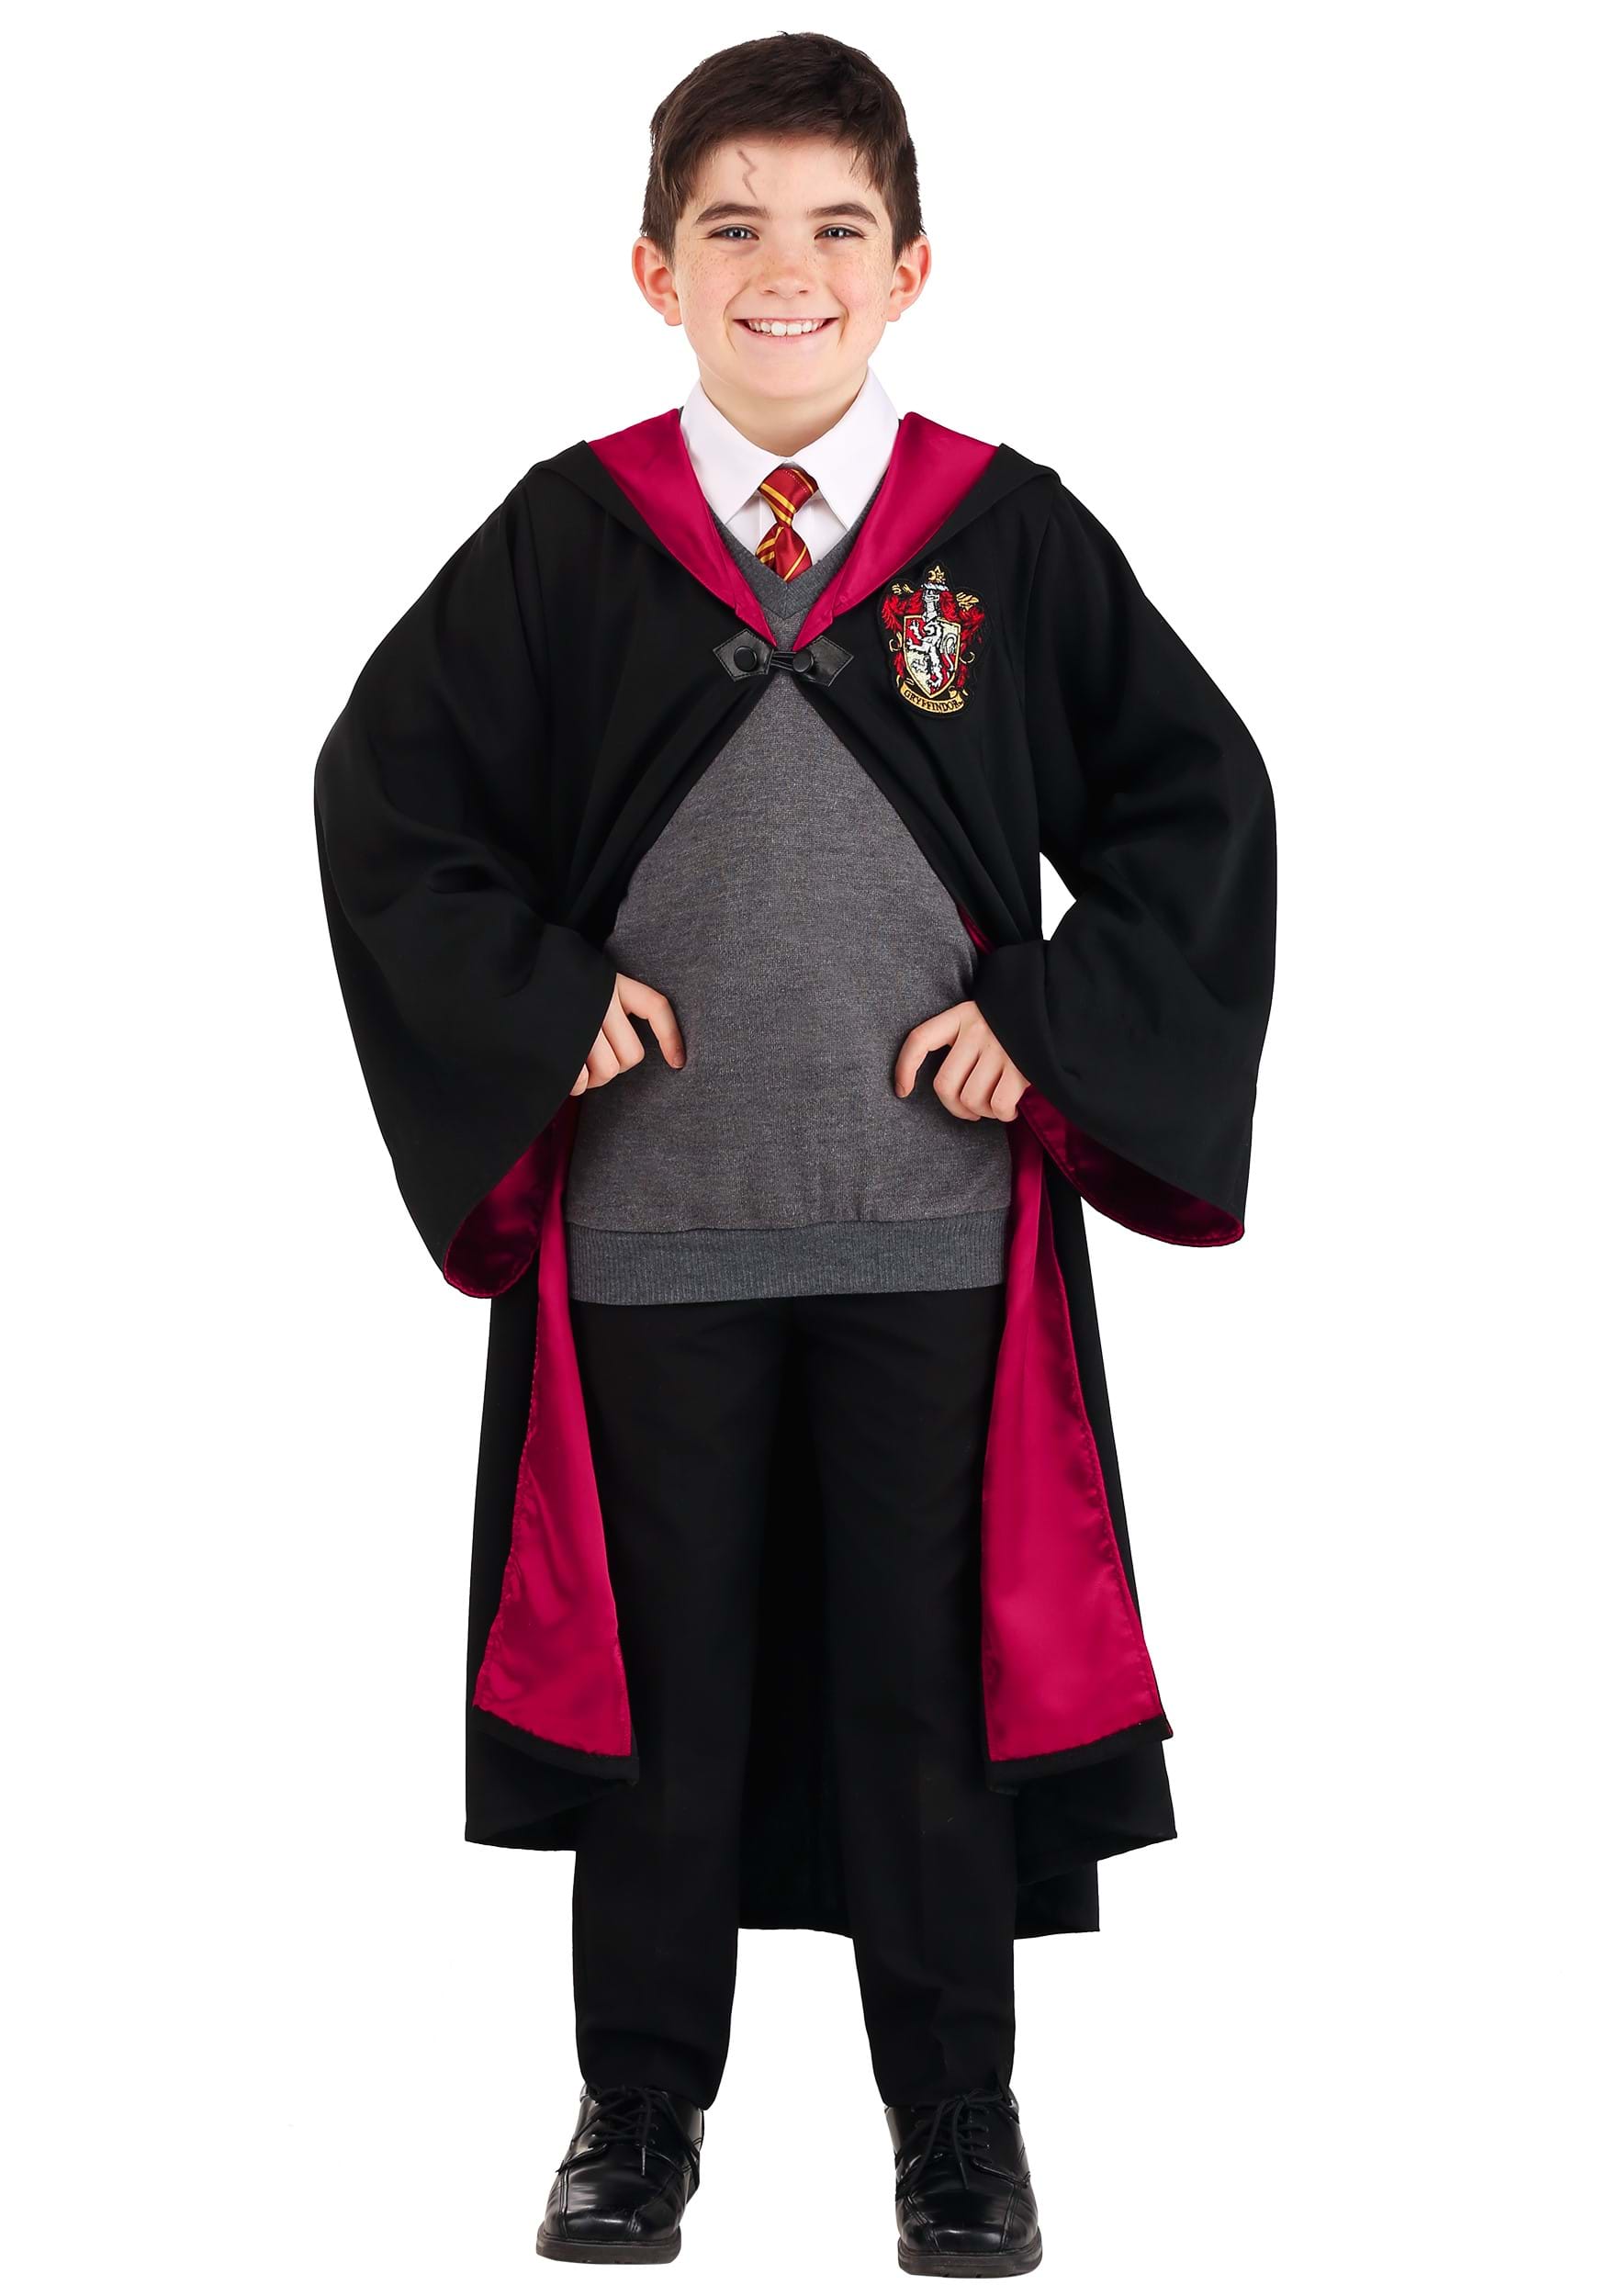 Photos - Fancy Dress Deluxe Jerry Leigh  Harry Potter Boy's Costume Black/Red/Yellow FUN 